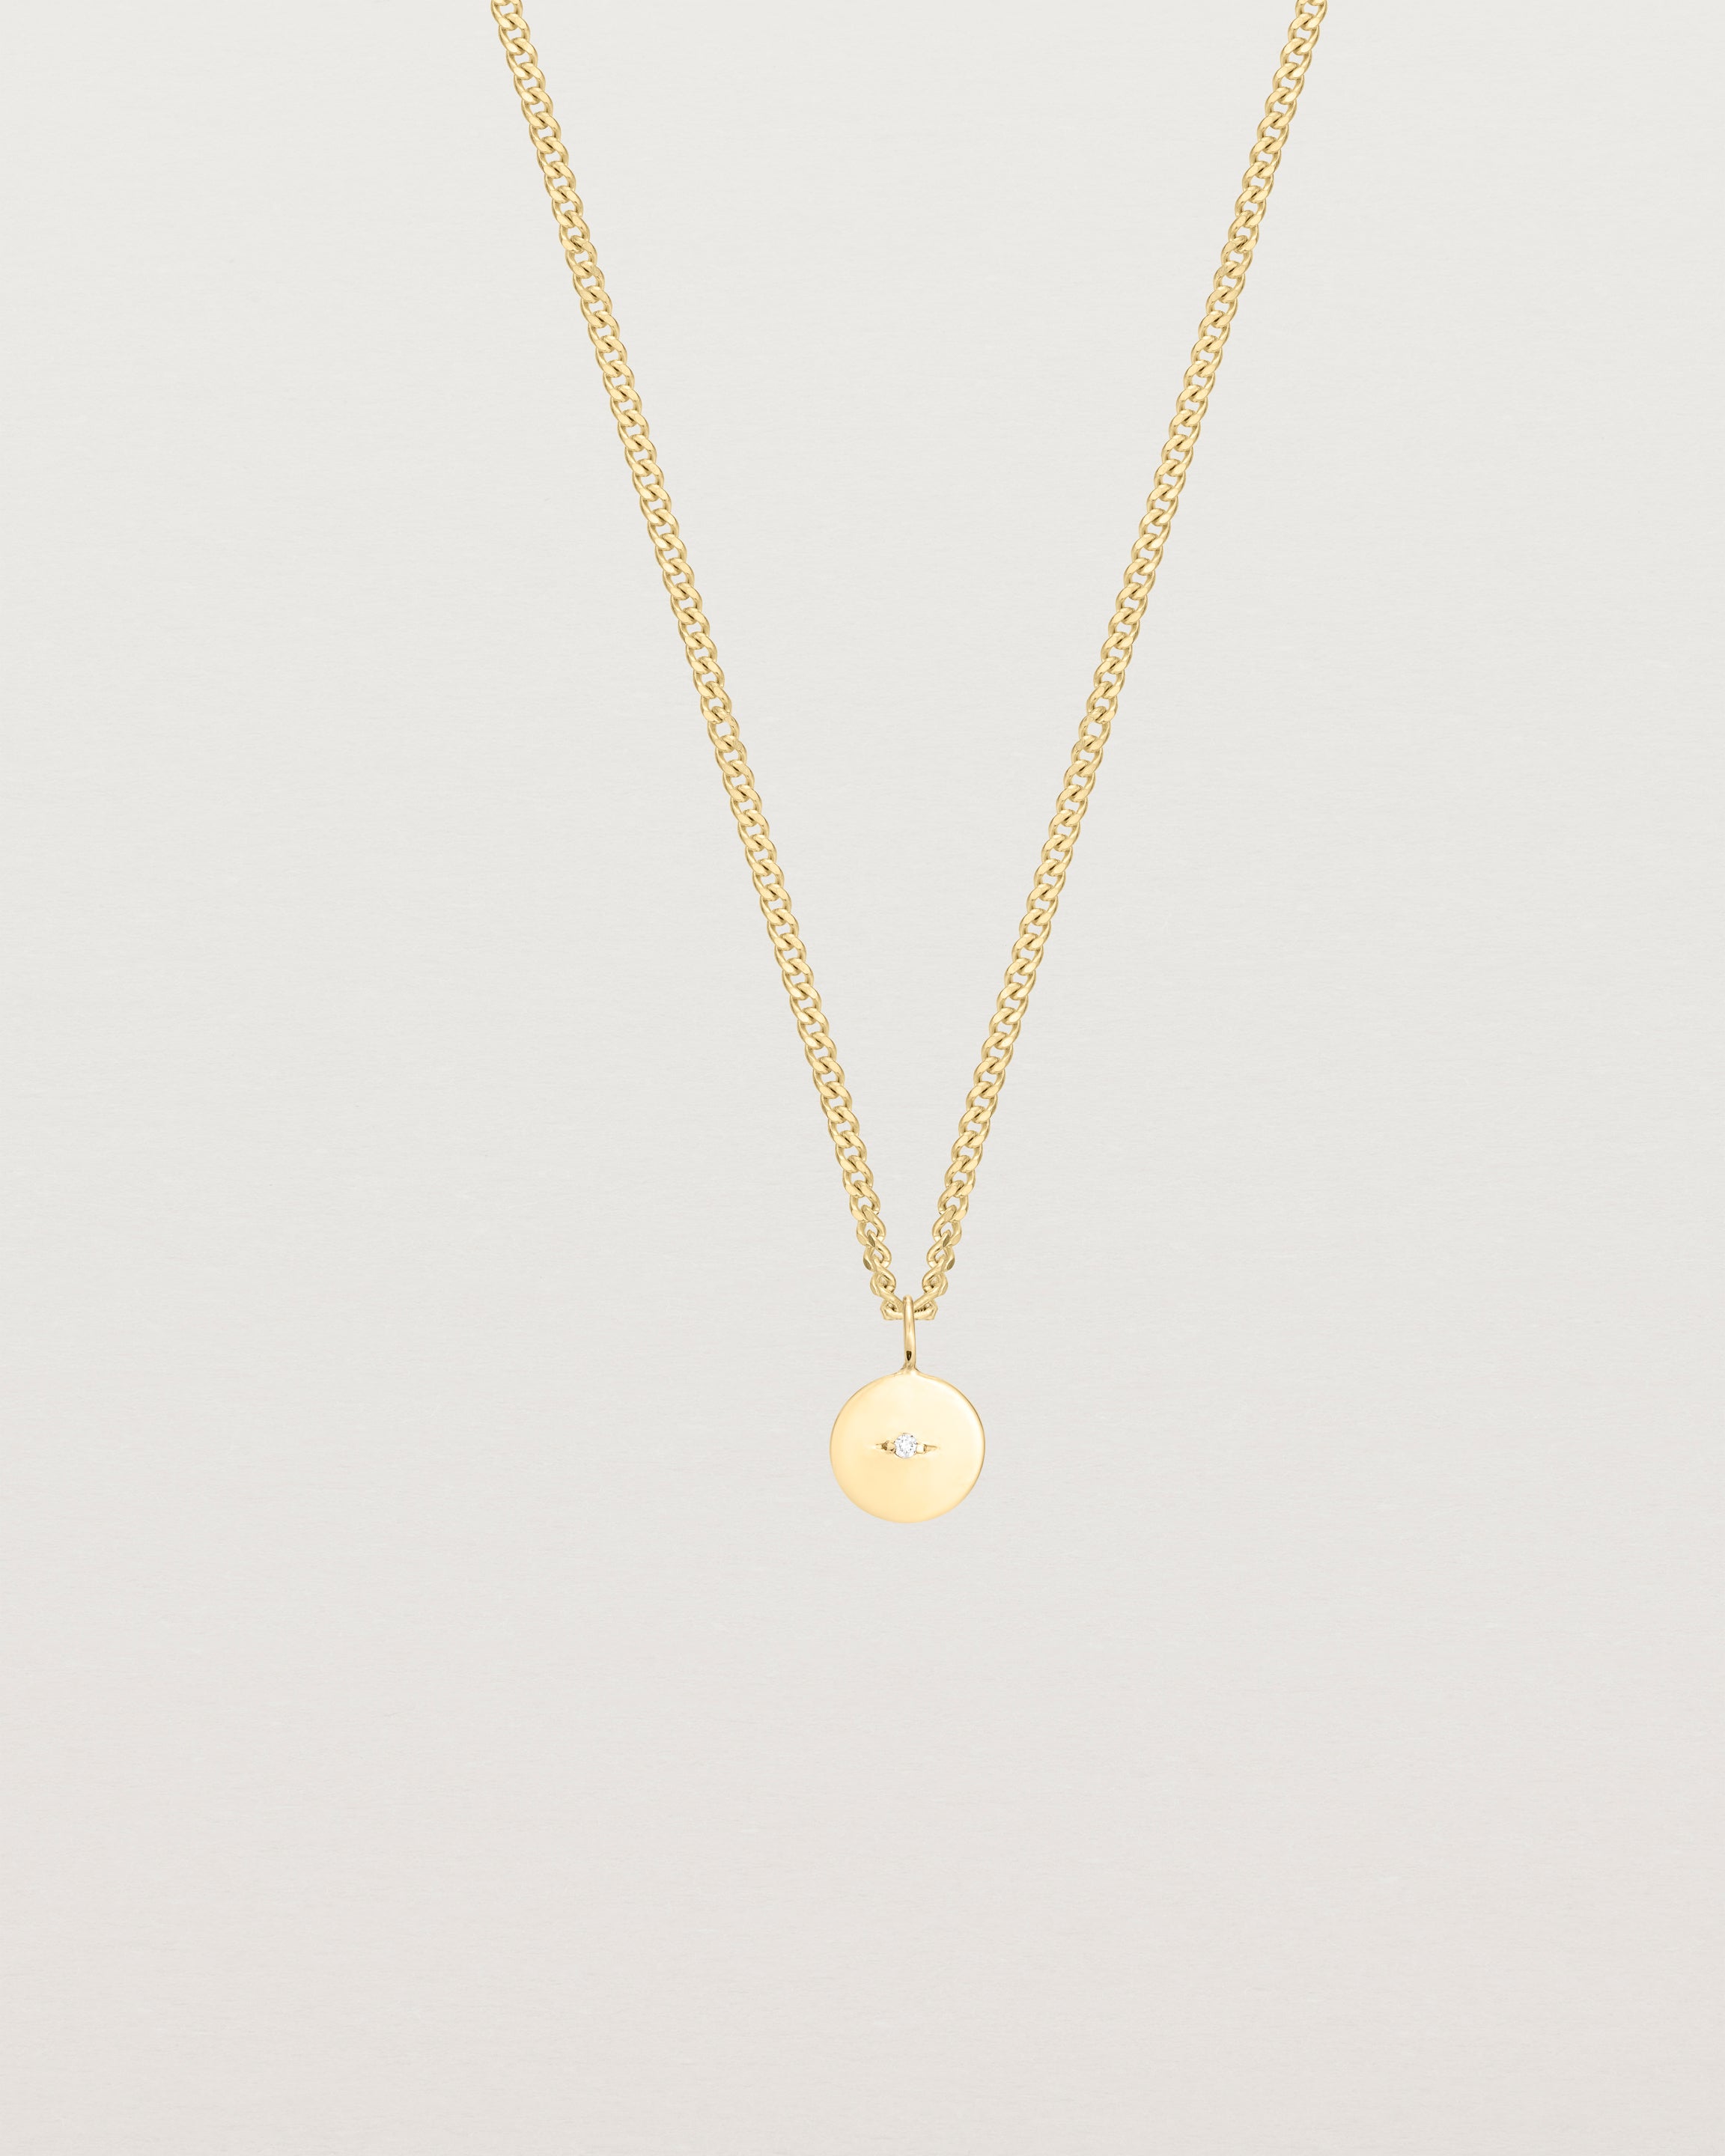 Front image of the Petits Eily necklace with diamond in yellow gold